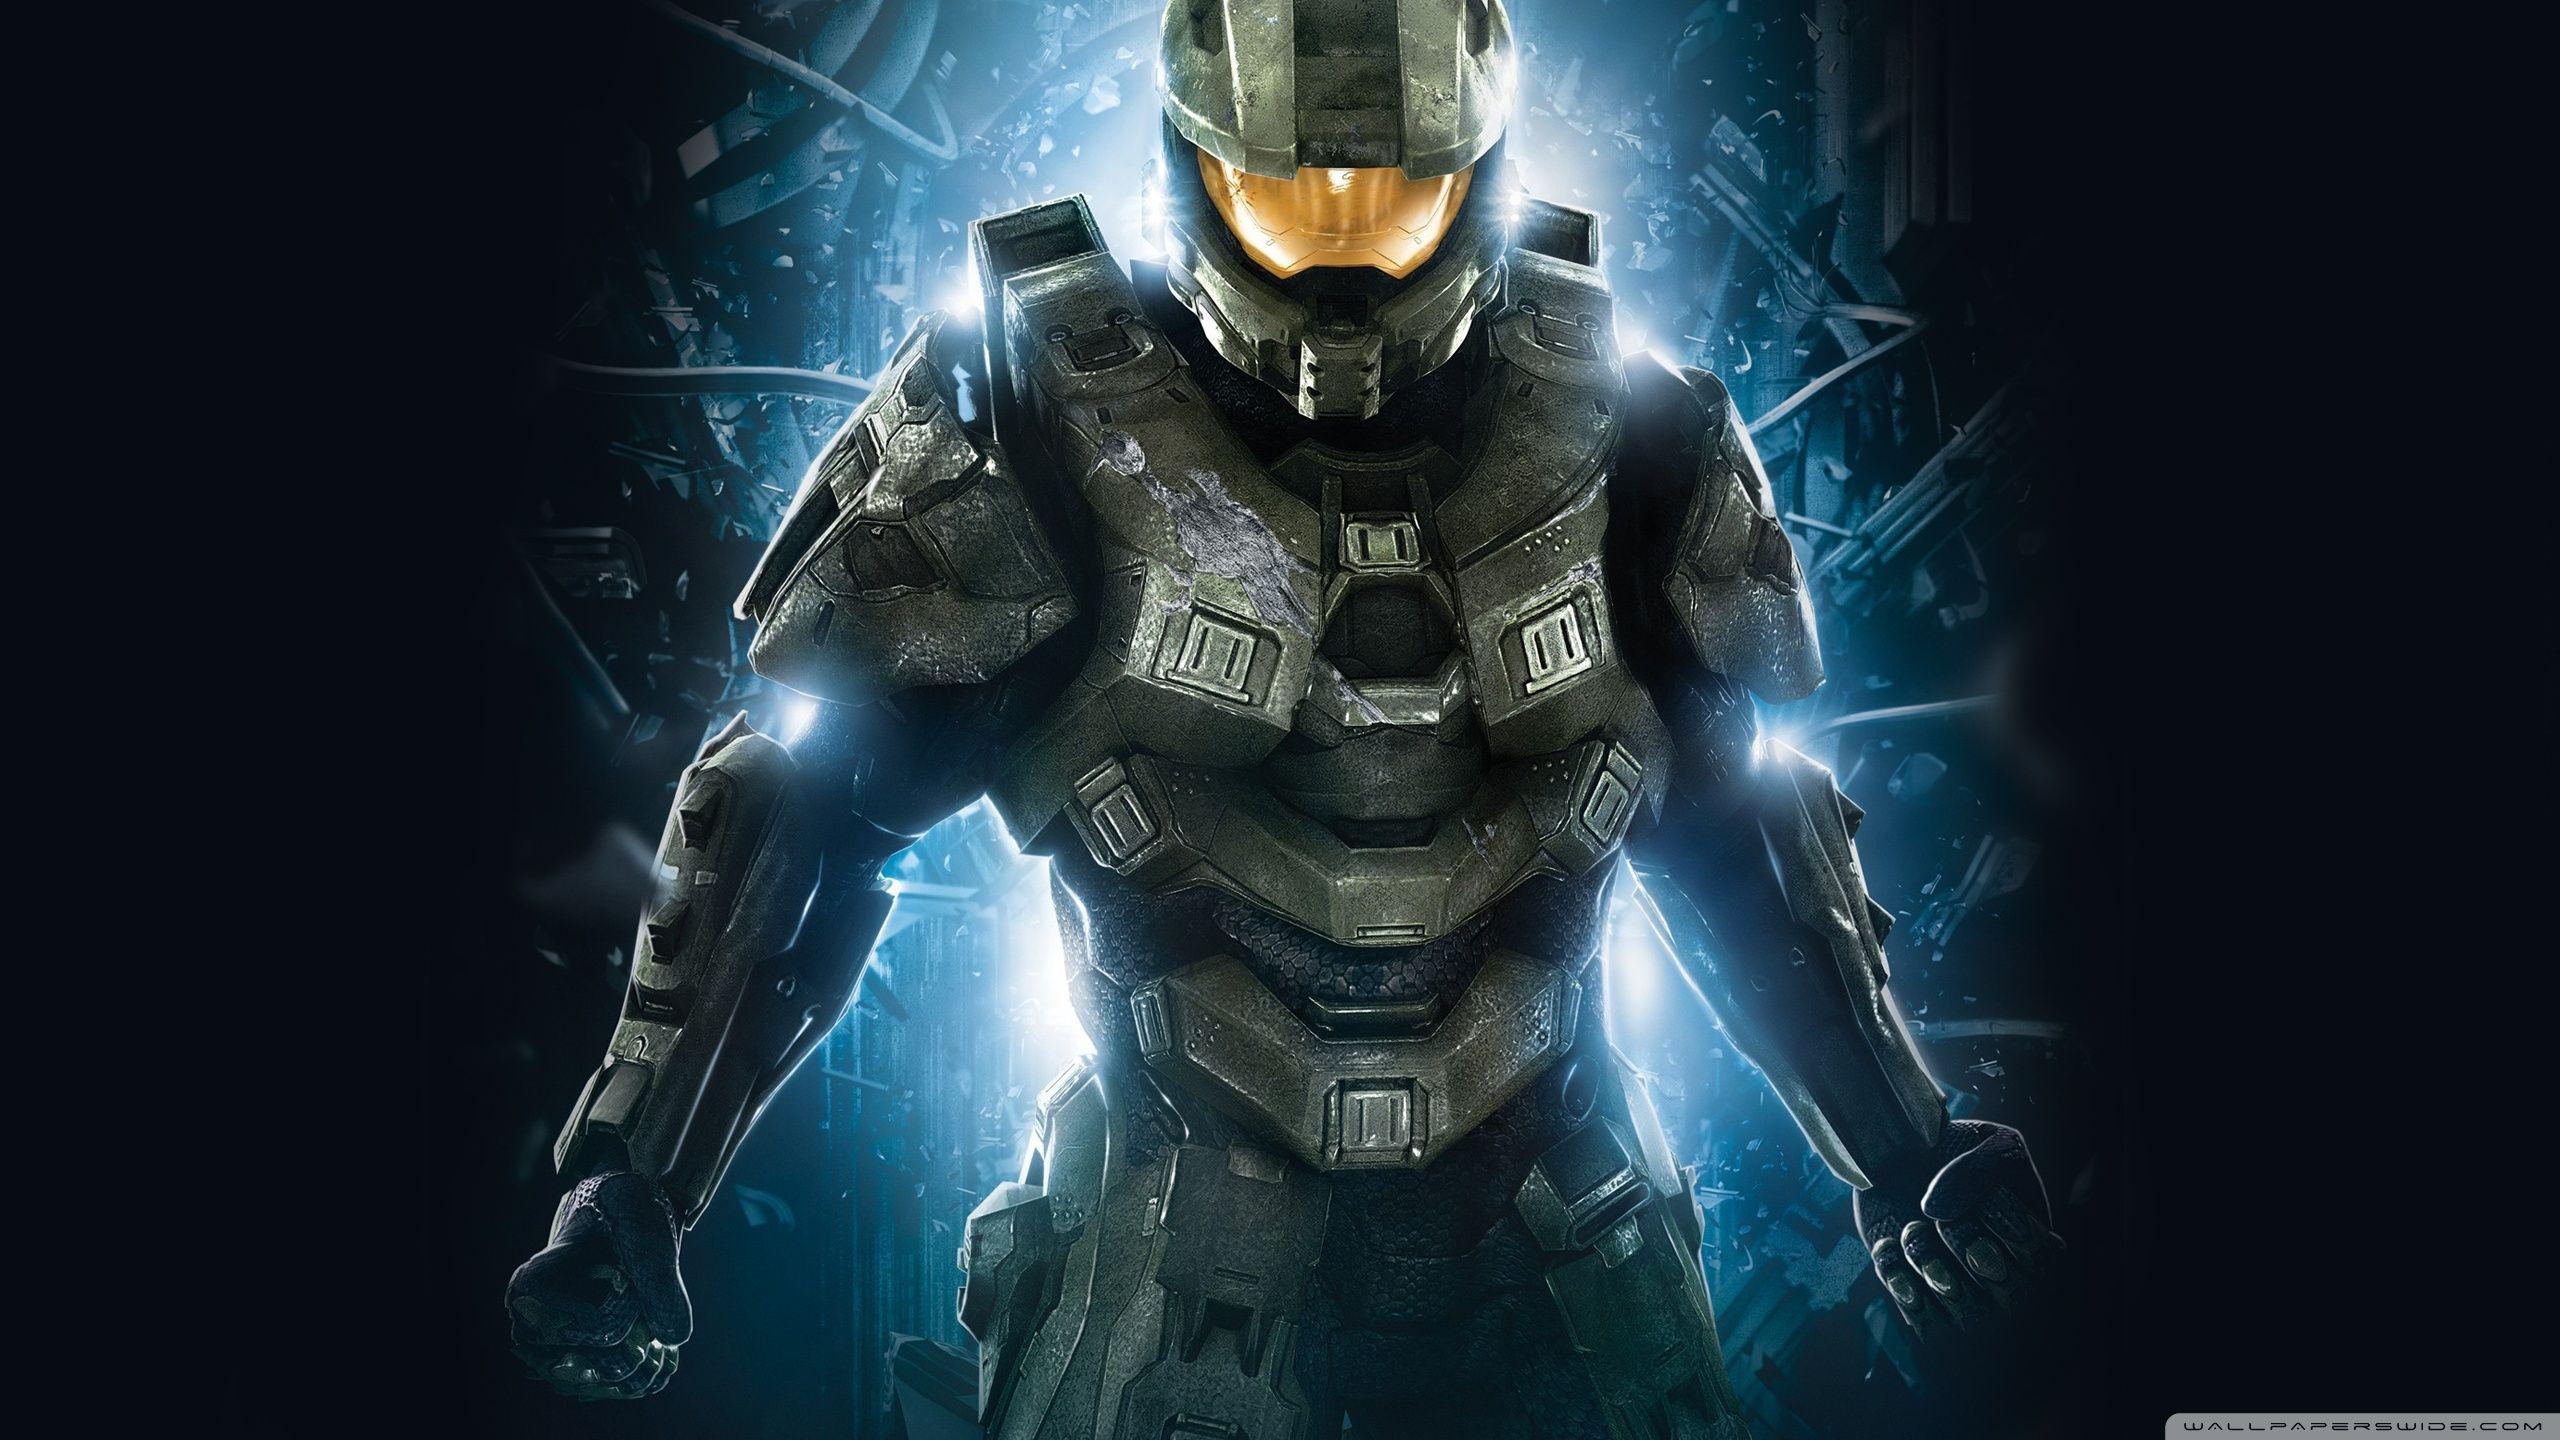 Halo 4 Master Chief ❤ 4K HD Desktop Wallpapers for 4K Ultra HD TV